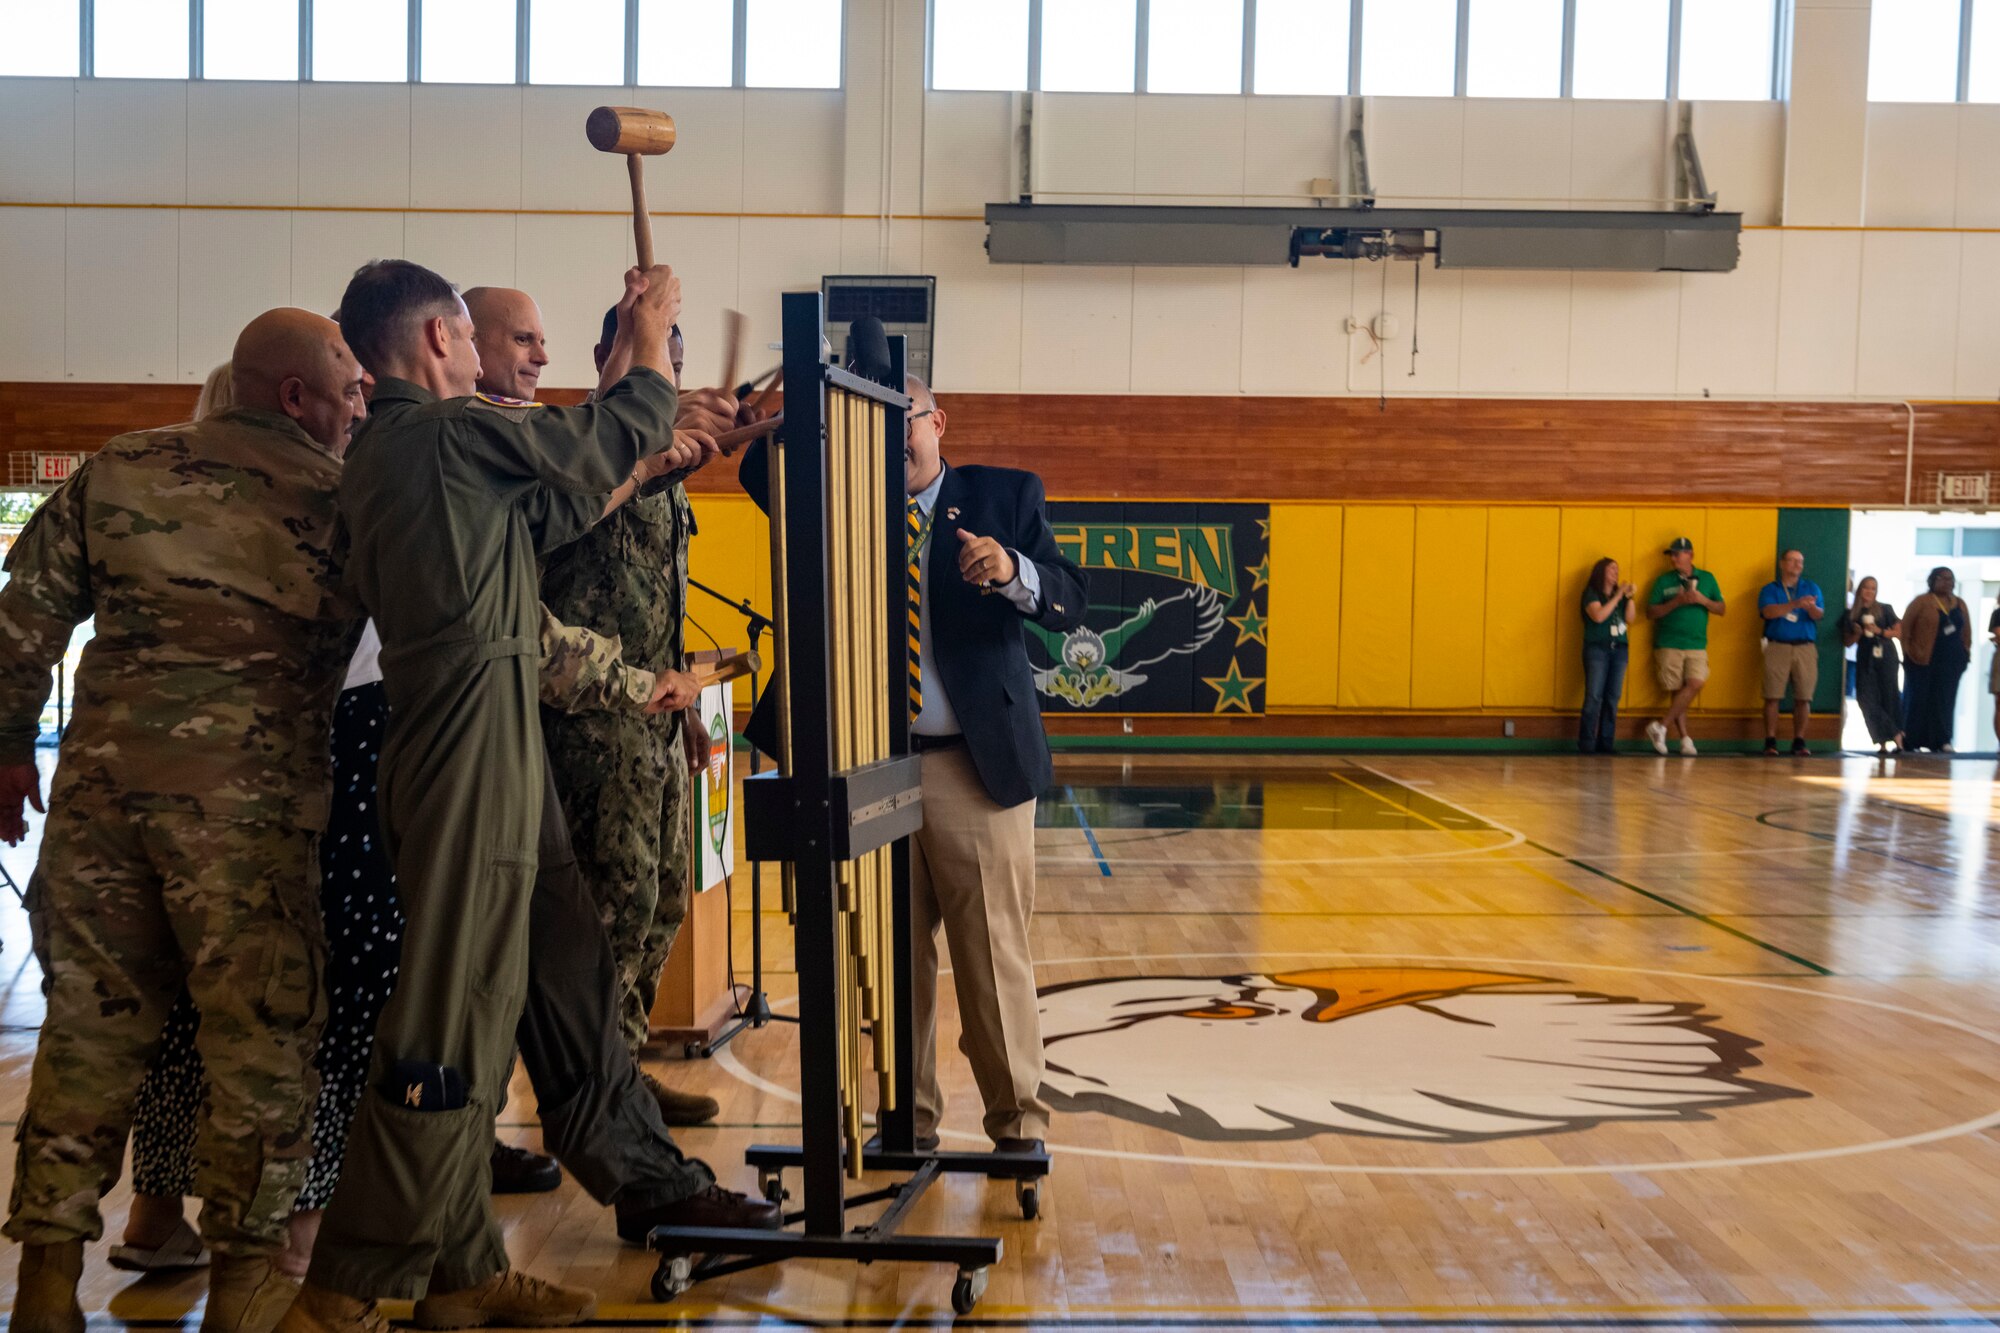 Military members in uniform swing mallets at the tubular bell instrument in a gym